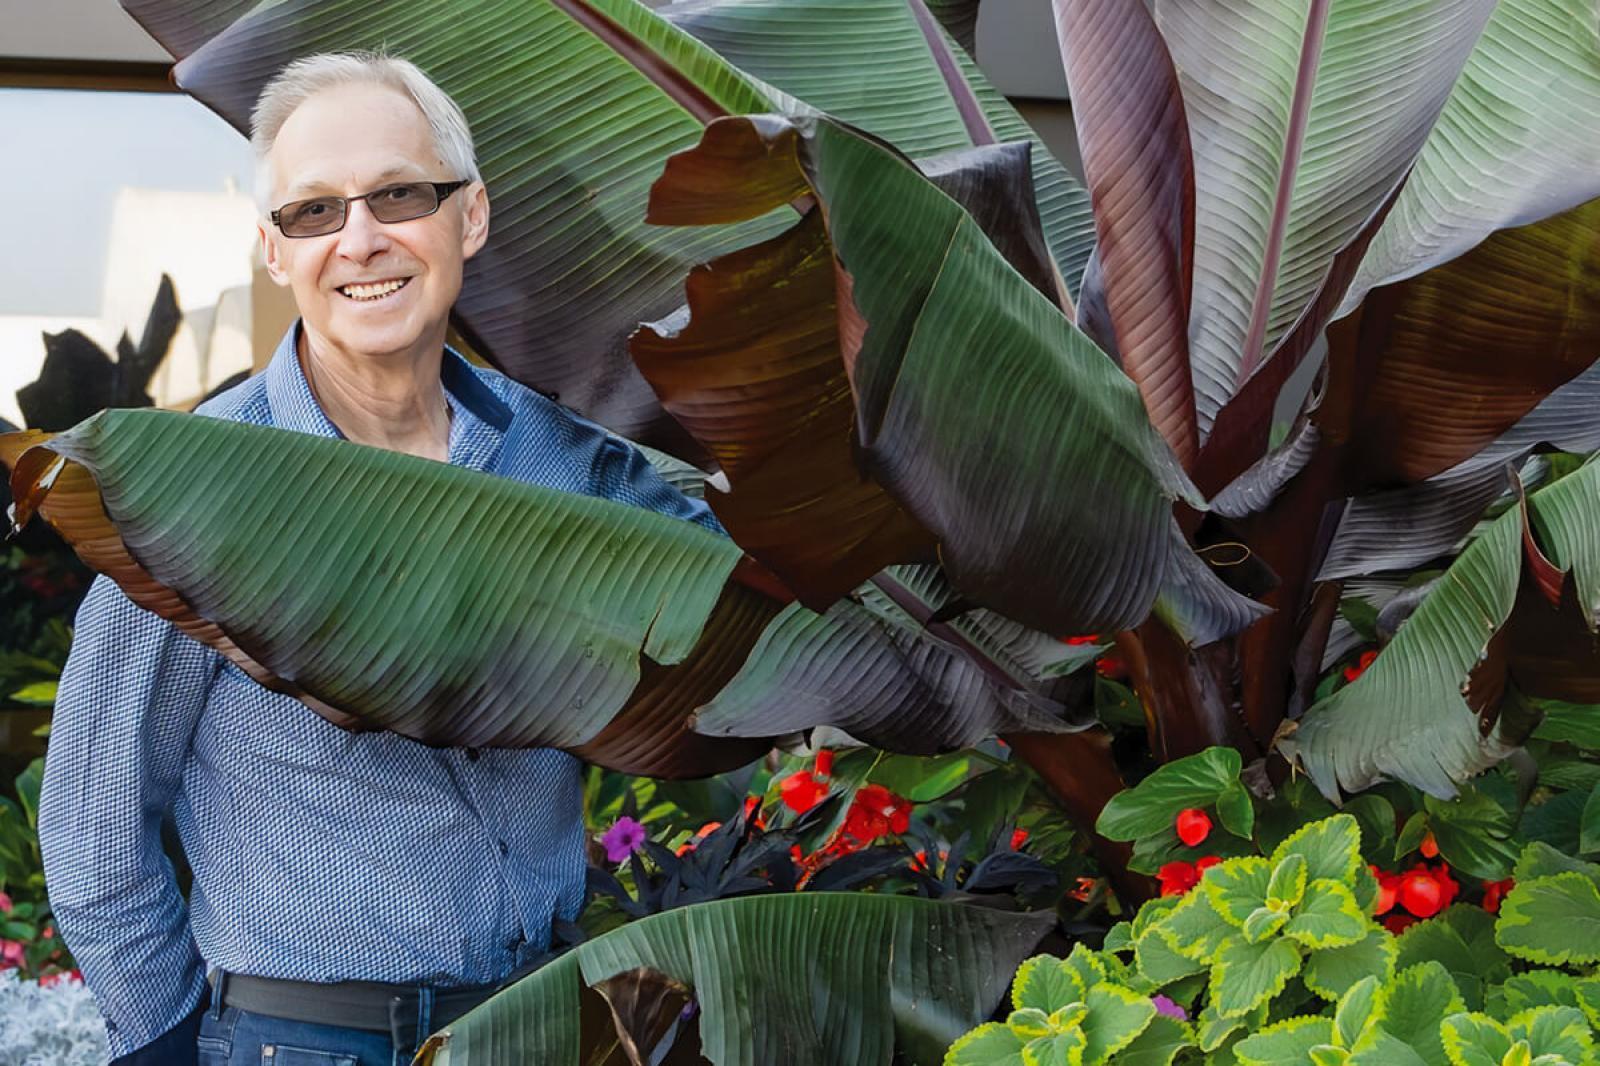 Lessons from a lifelong horticulturist